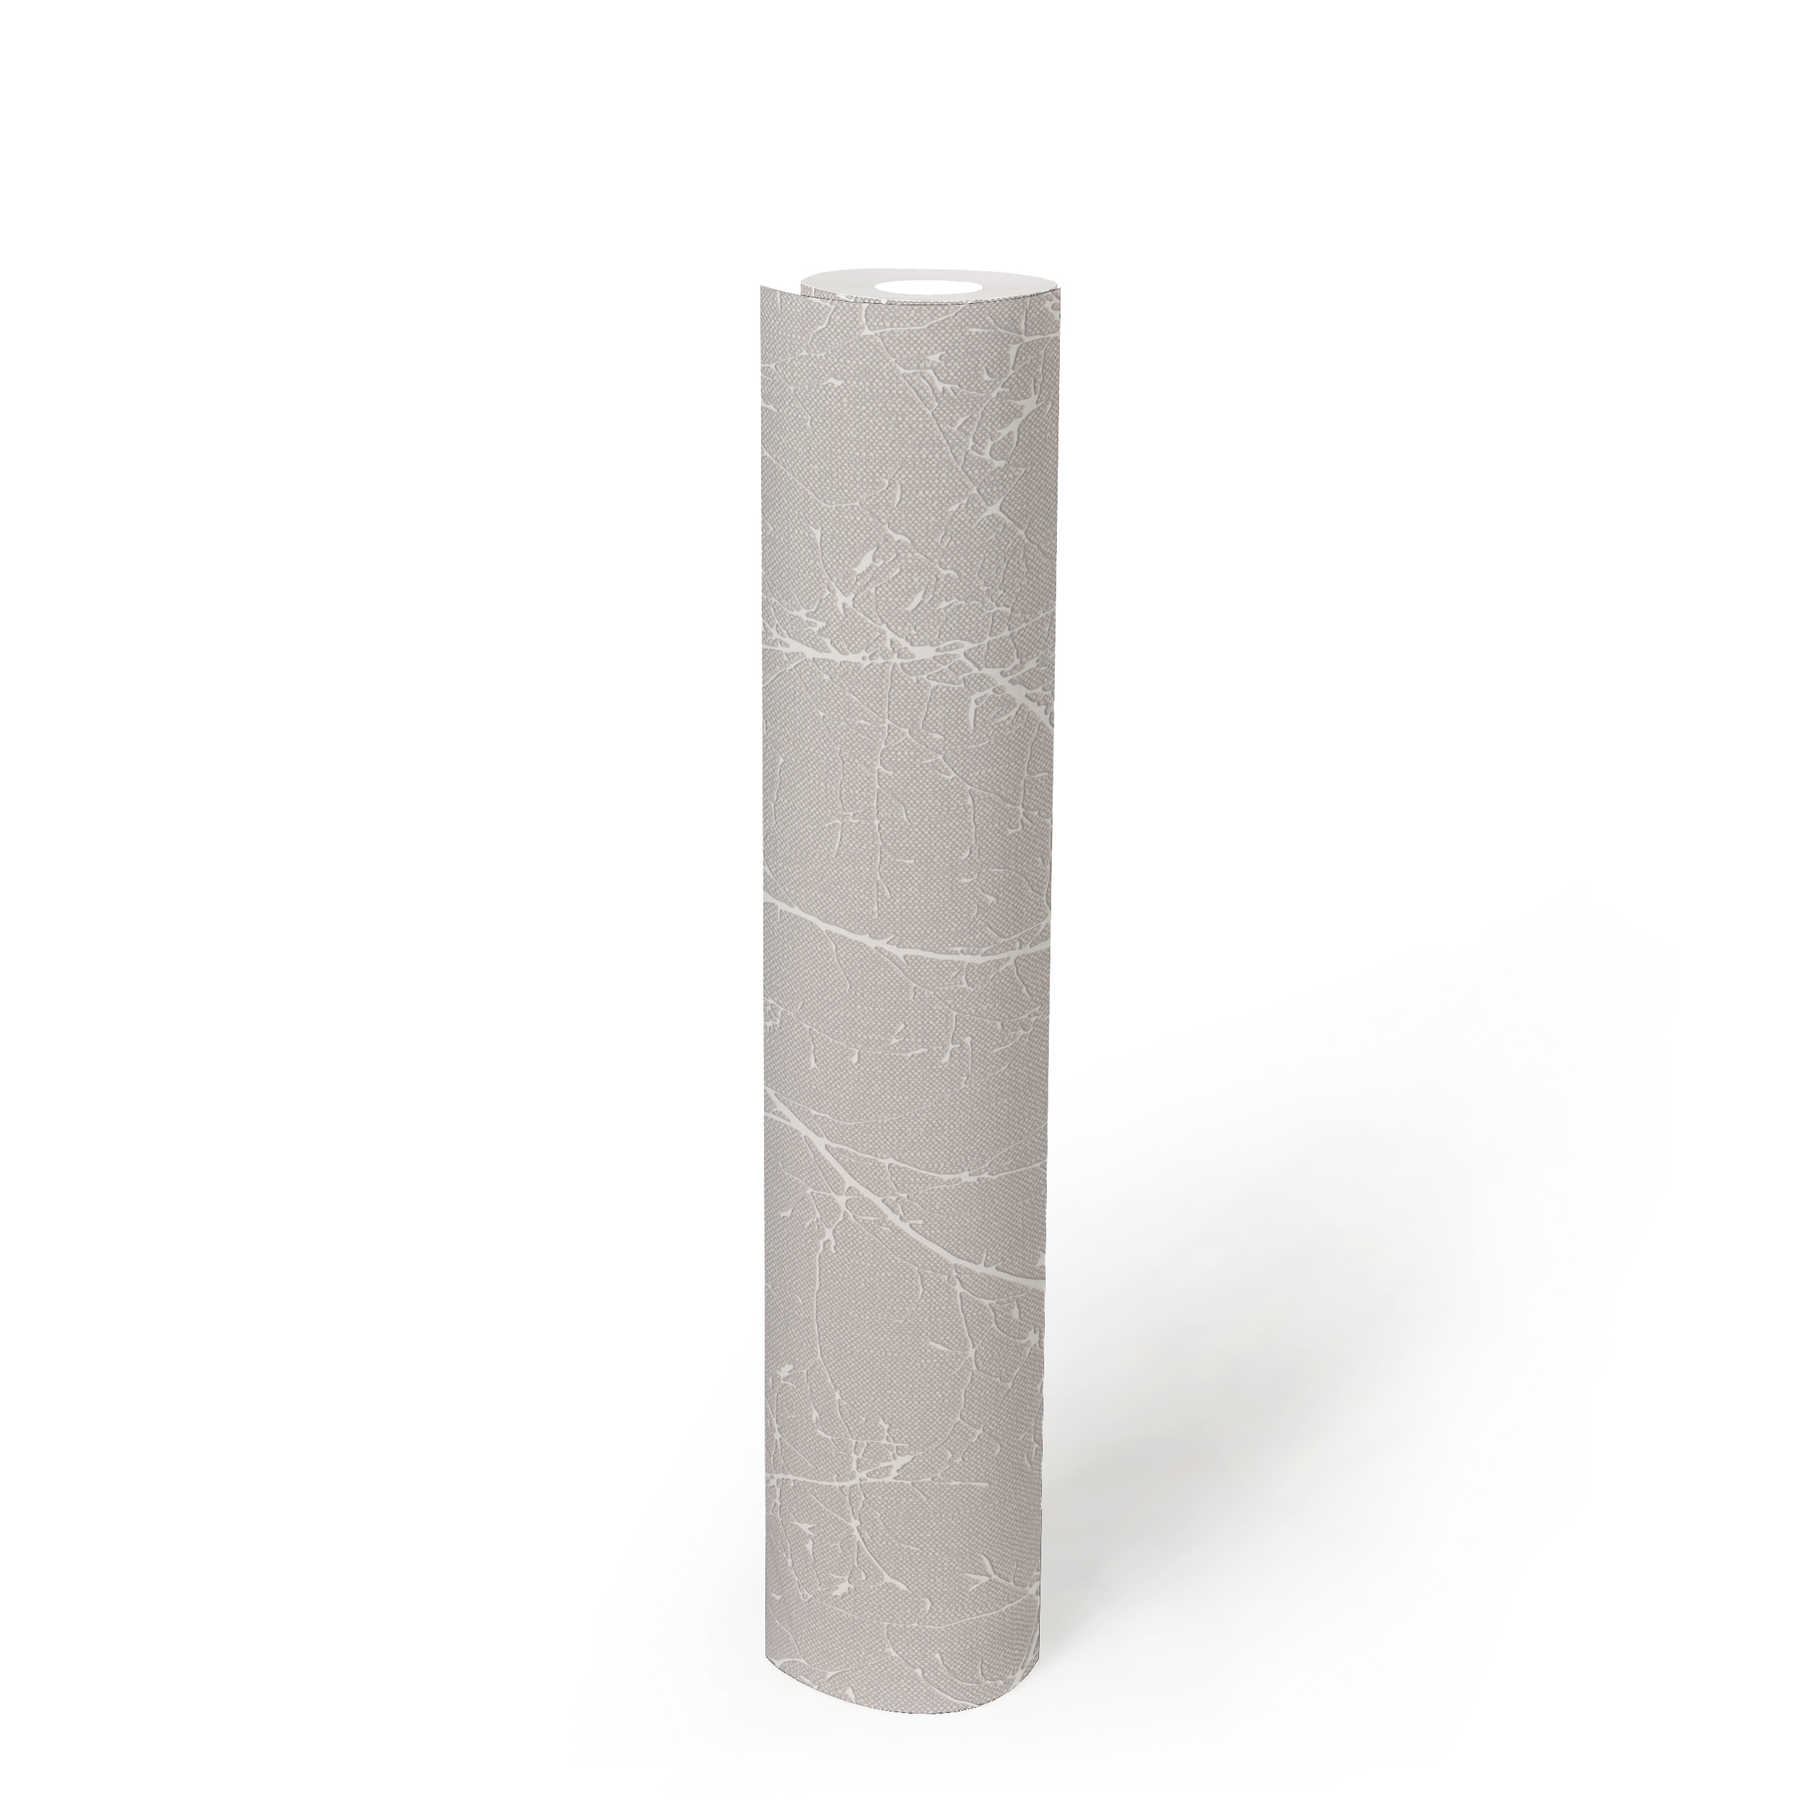             Non-woven wallpaper with linen look flowers and branches - grey, white
        